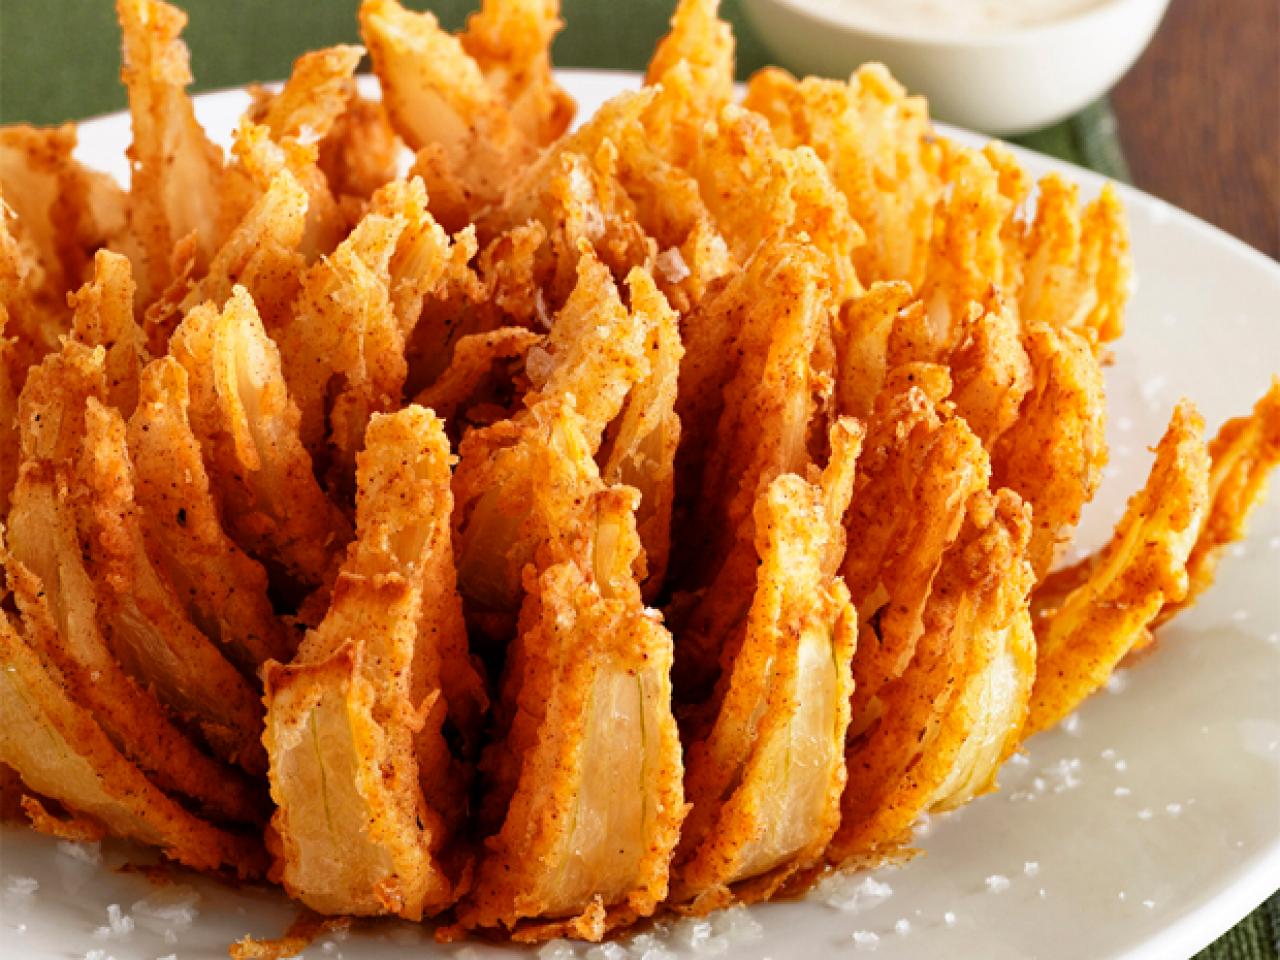 Onion Blossom (BEST Bloomin Onion Copycat) - Savory Experiments